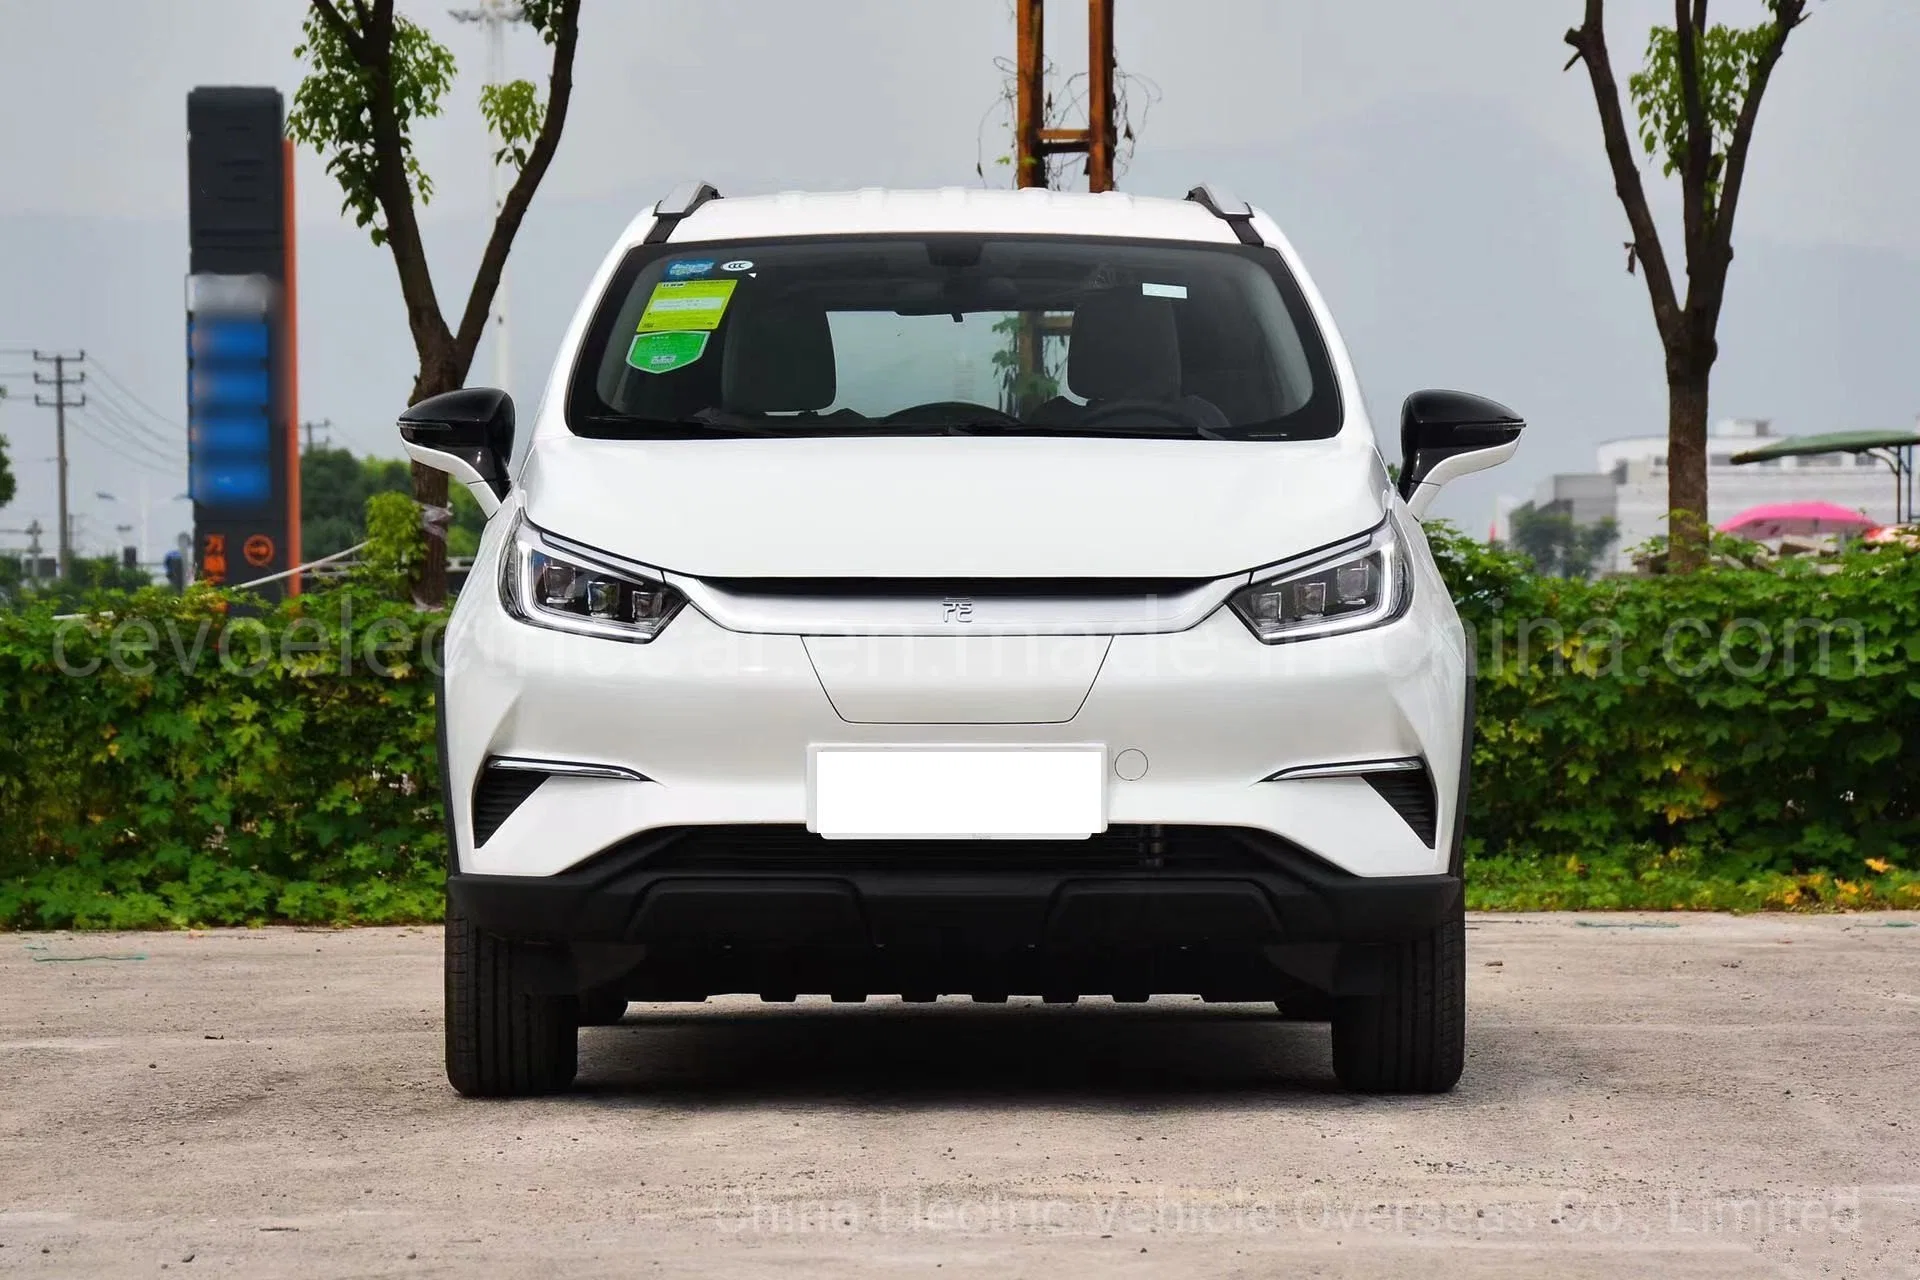 Cheap Low Cost High Speed Fastest Long Battery Life New Energy Best Value Avaliable Efficiency EV SUV Cars Electric Vehicles B Yd Yuan PRO Electric Car for Sale